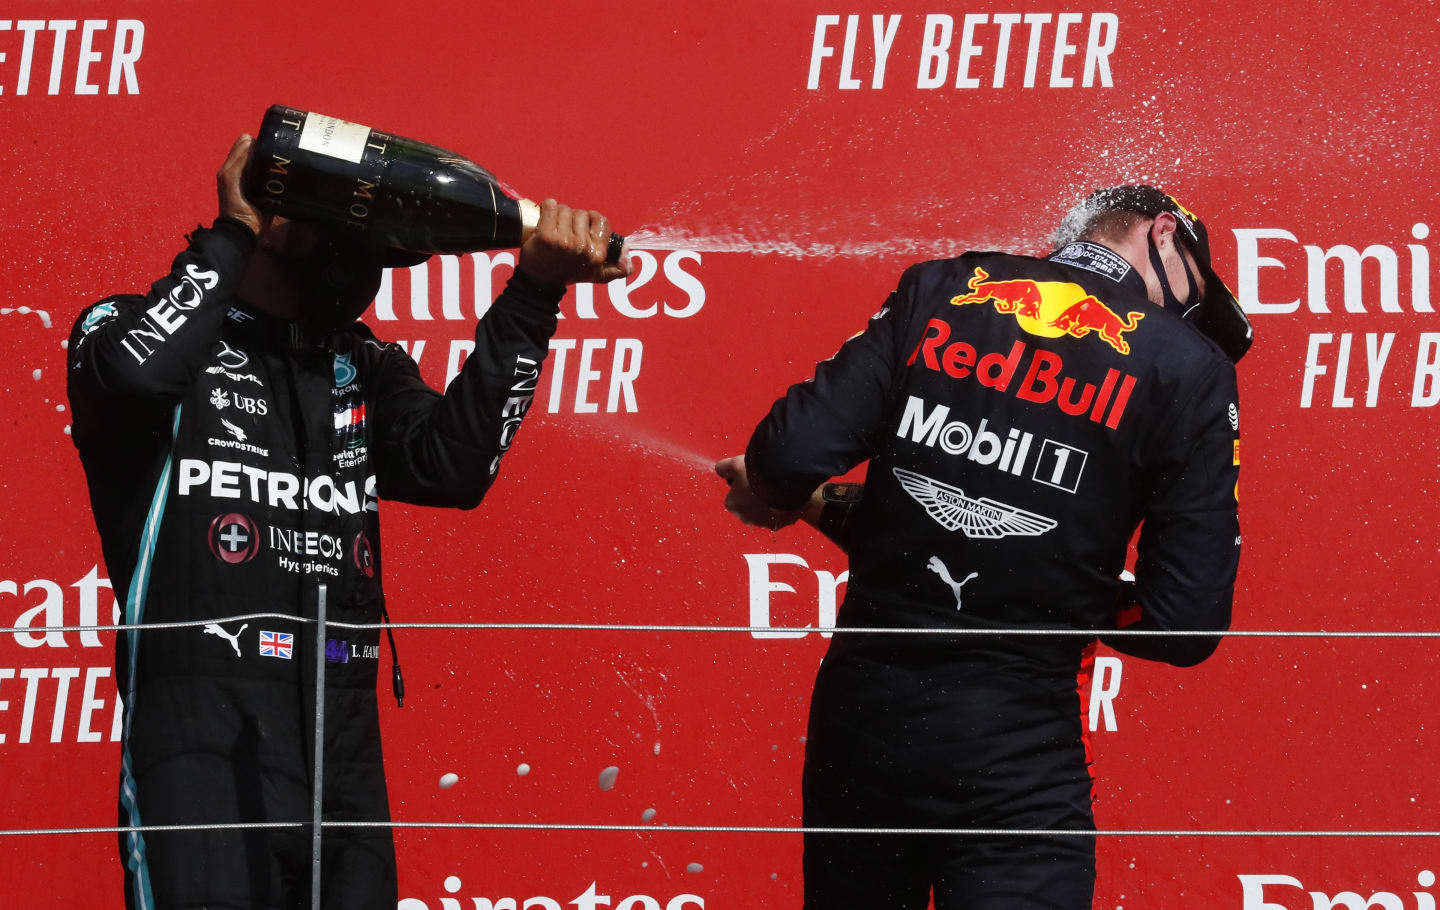 NORTHAMPTON, ENGLAND - AUGUST 09: Race winner Max Verstappen of Netherlands and Red Bull Racing and second placed Lewis Hamilton of Great Britain and Mercedes GP celebrate on the podium  during the F1 70th Anniversary Grand Prix at Silverstone on August 09, 2020 in Northampton, England. (Photo by Frank Augstein/Pool via Getty Images)